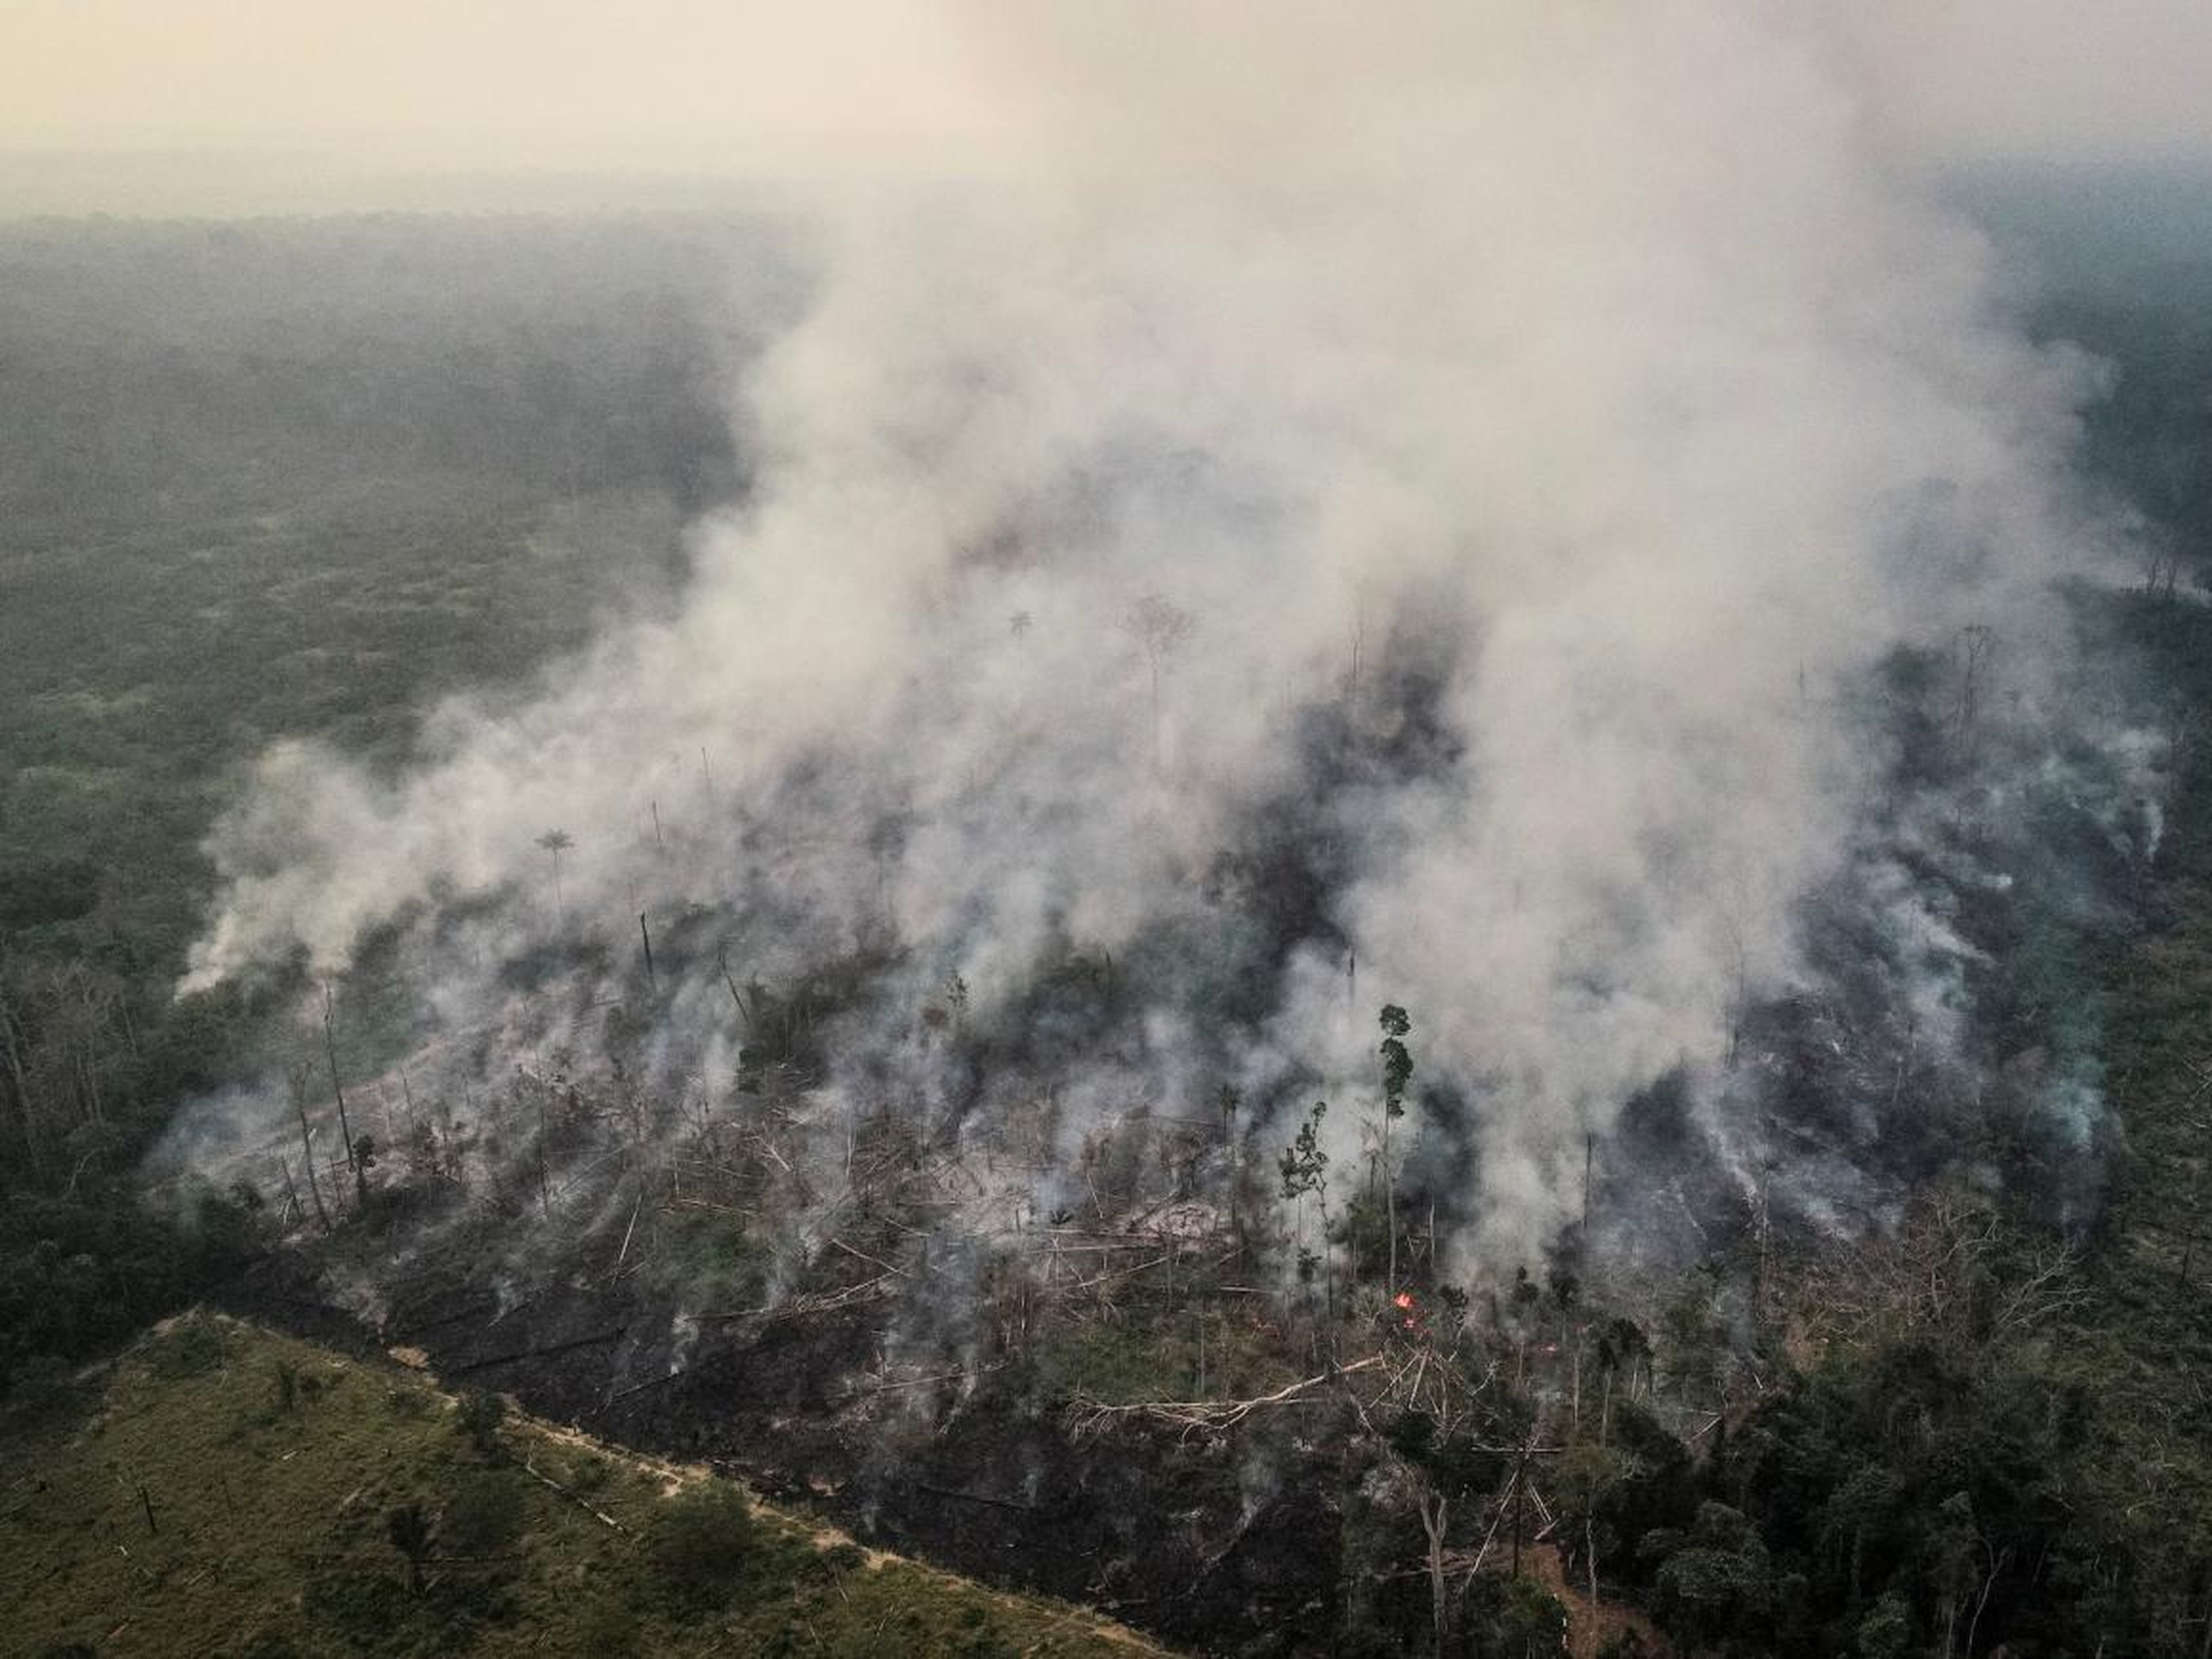 An aerial view of a tract of the Amazon jungle burning as it gets cleared by loggers and farmers, August 23, 2019.